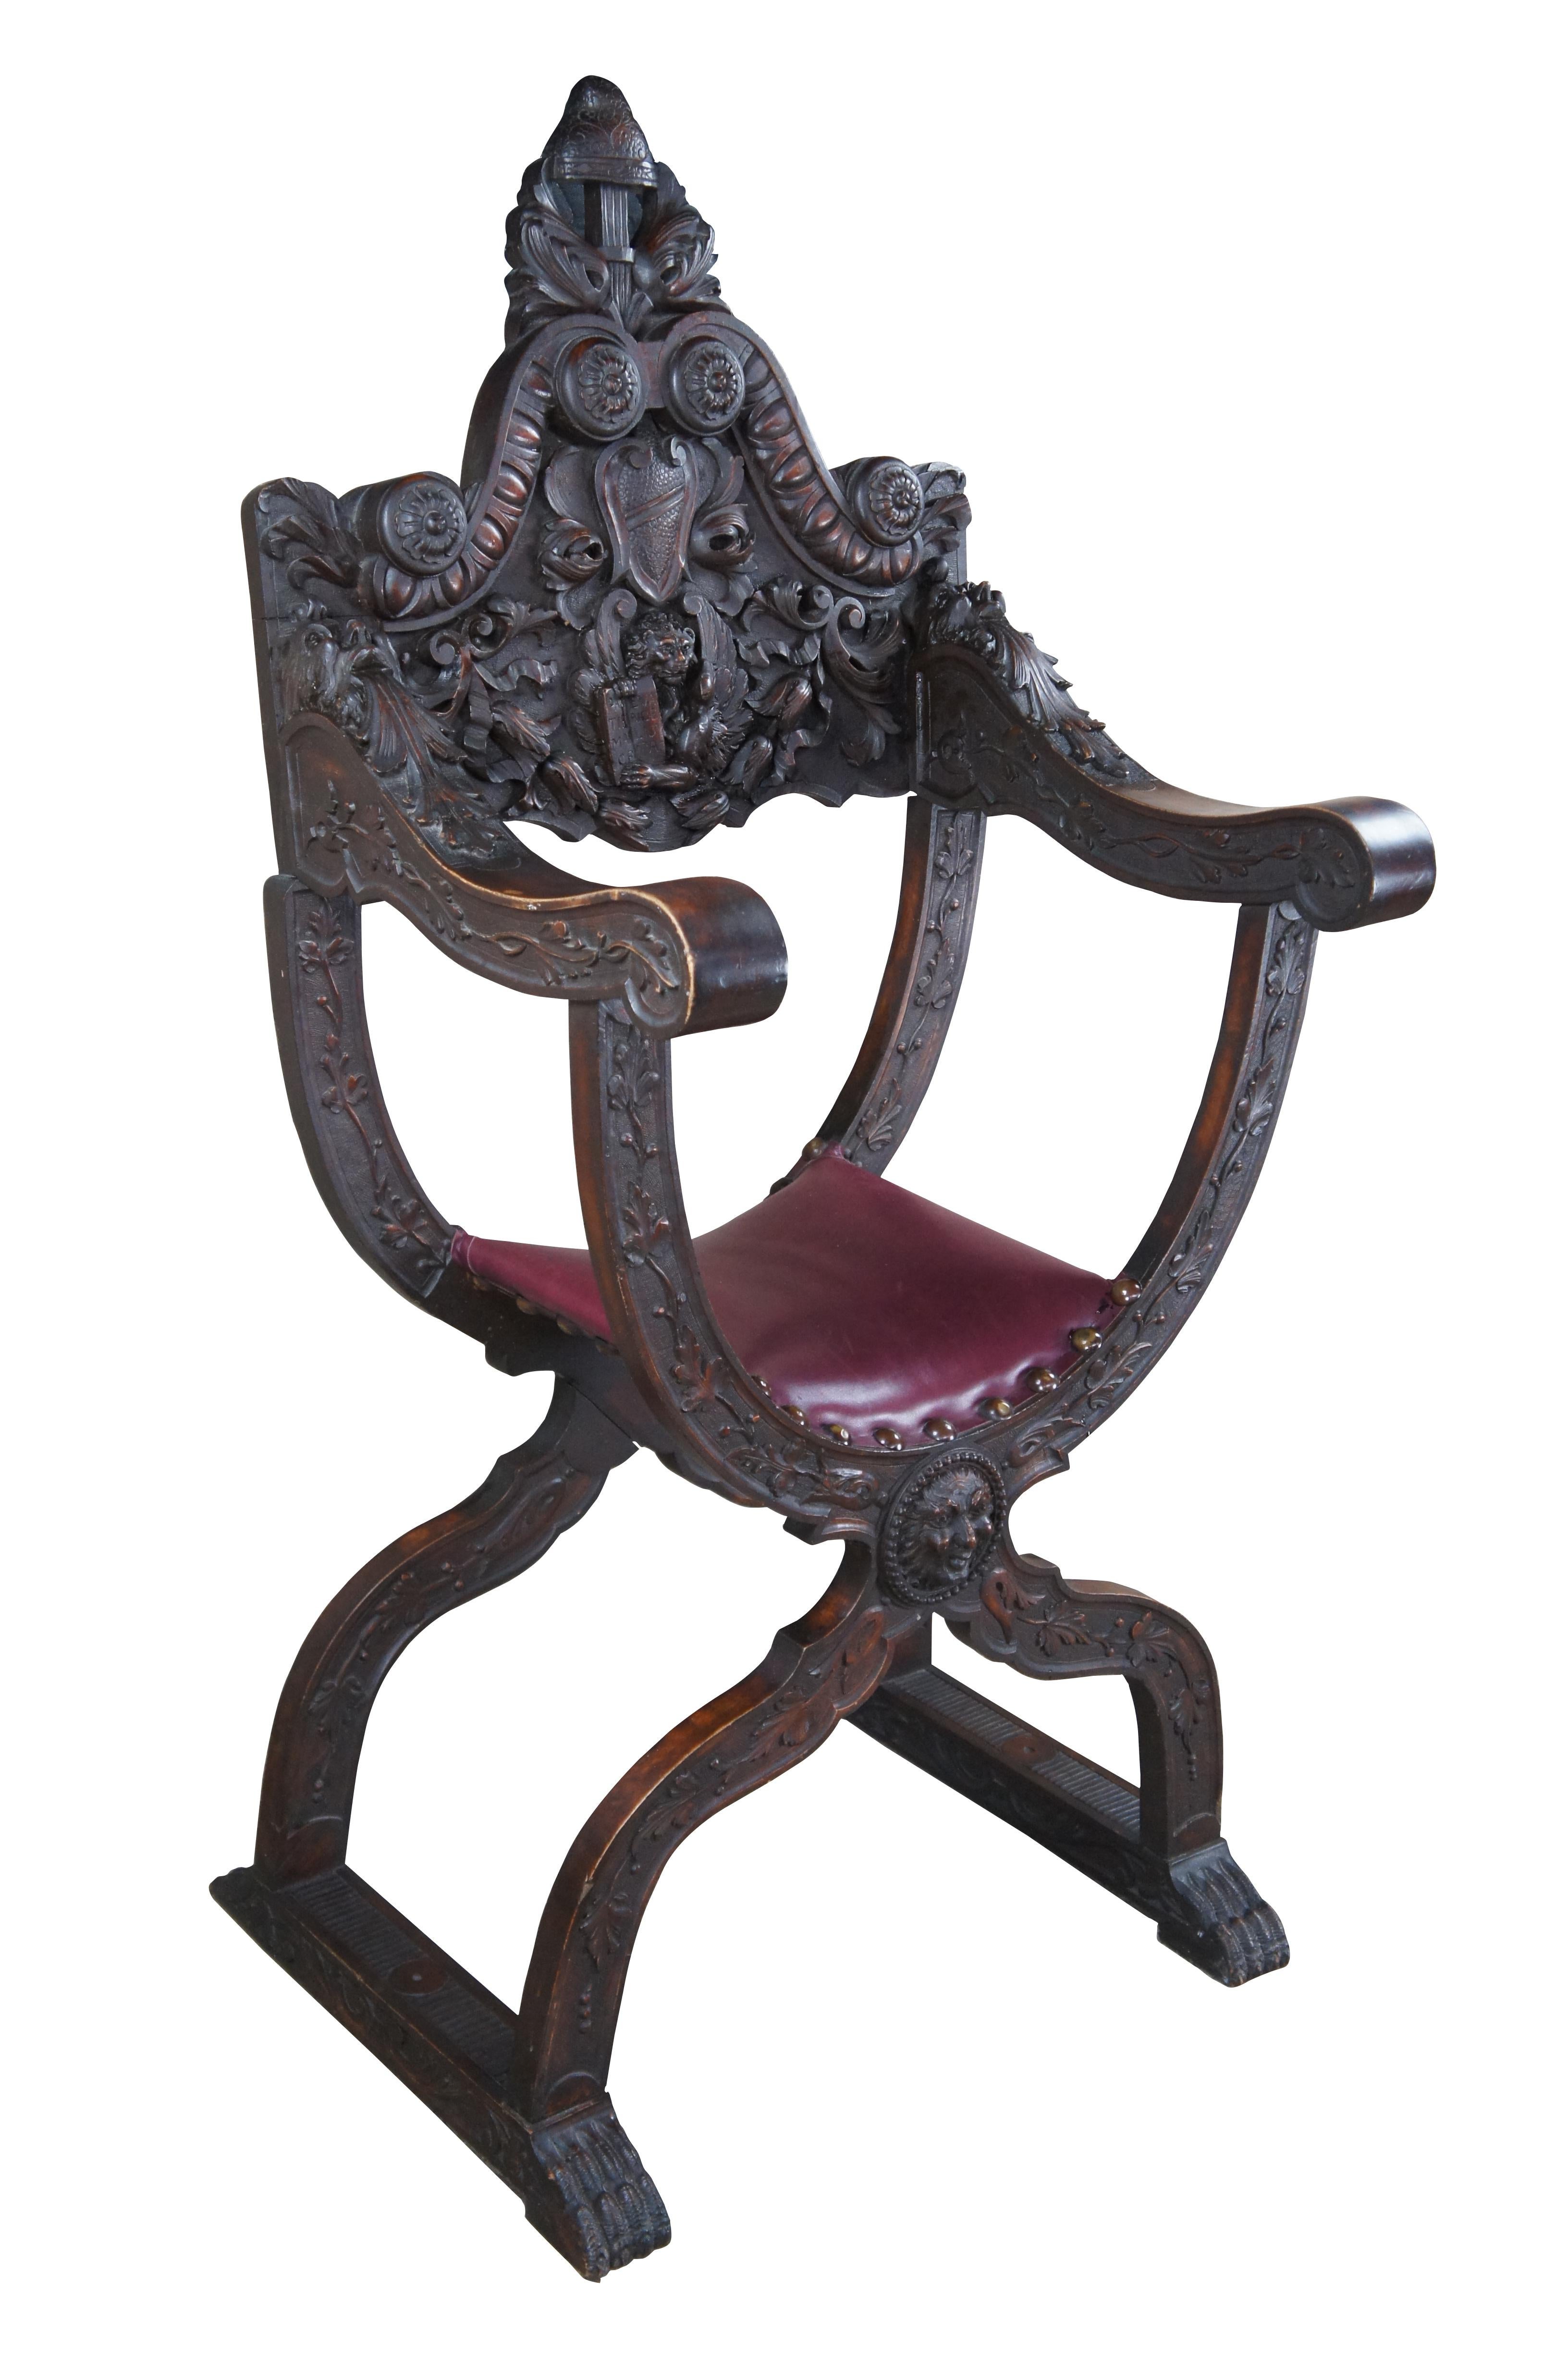 Exceptional mid 19th century Italian Renaissance Revival Savonarola Curule Arm Chair. Features a meticulously carved walnut frame with leather seat. The back is showcased by a winged lion holding a tablet beneath a shield. Both motifs are surrounded